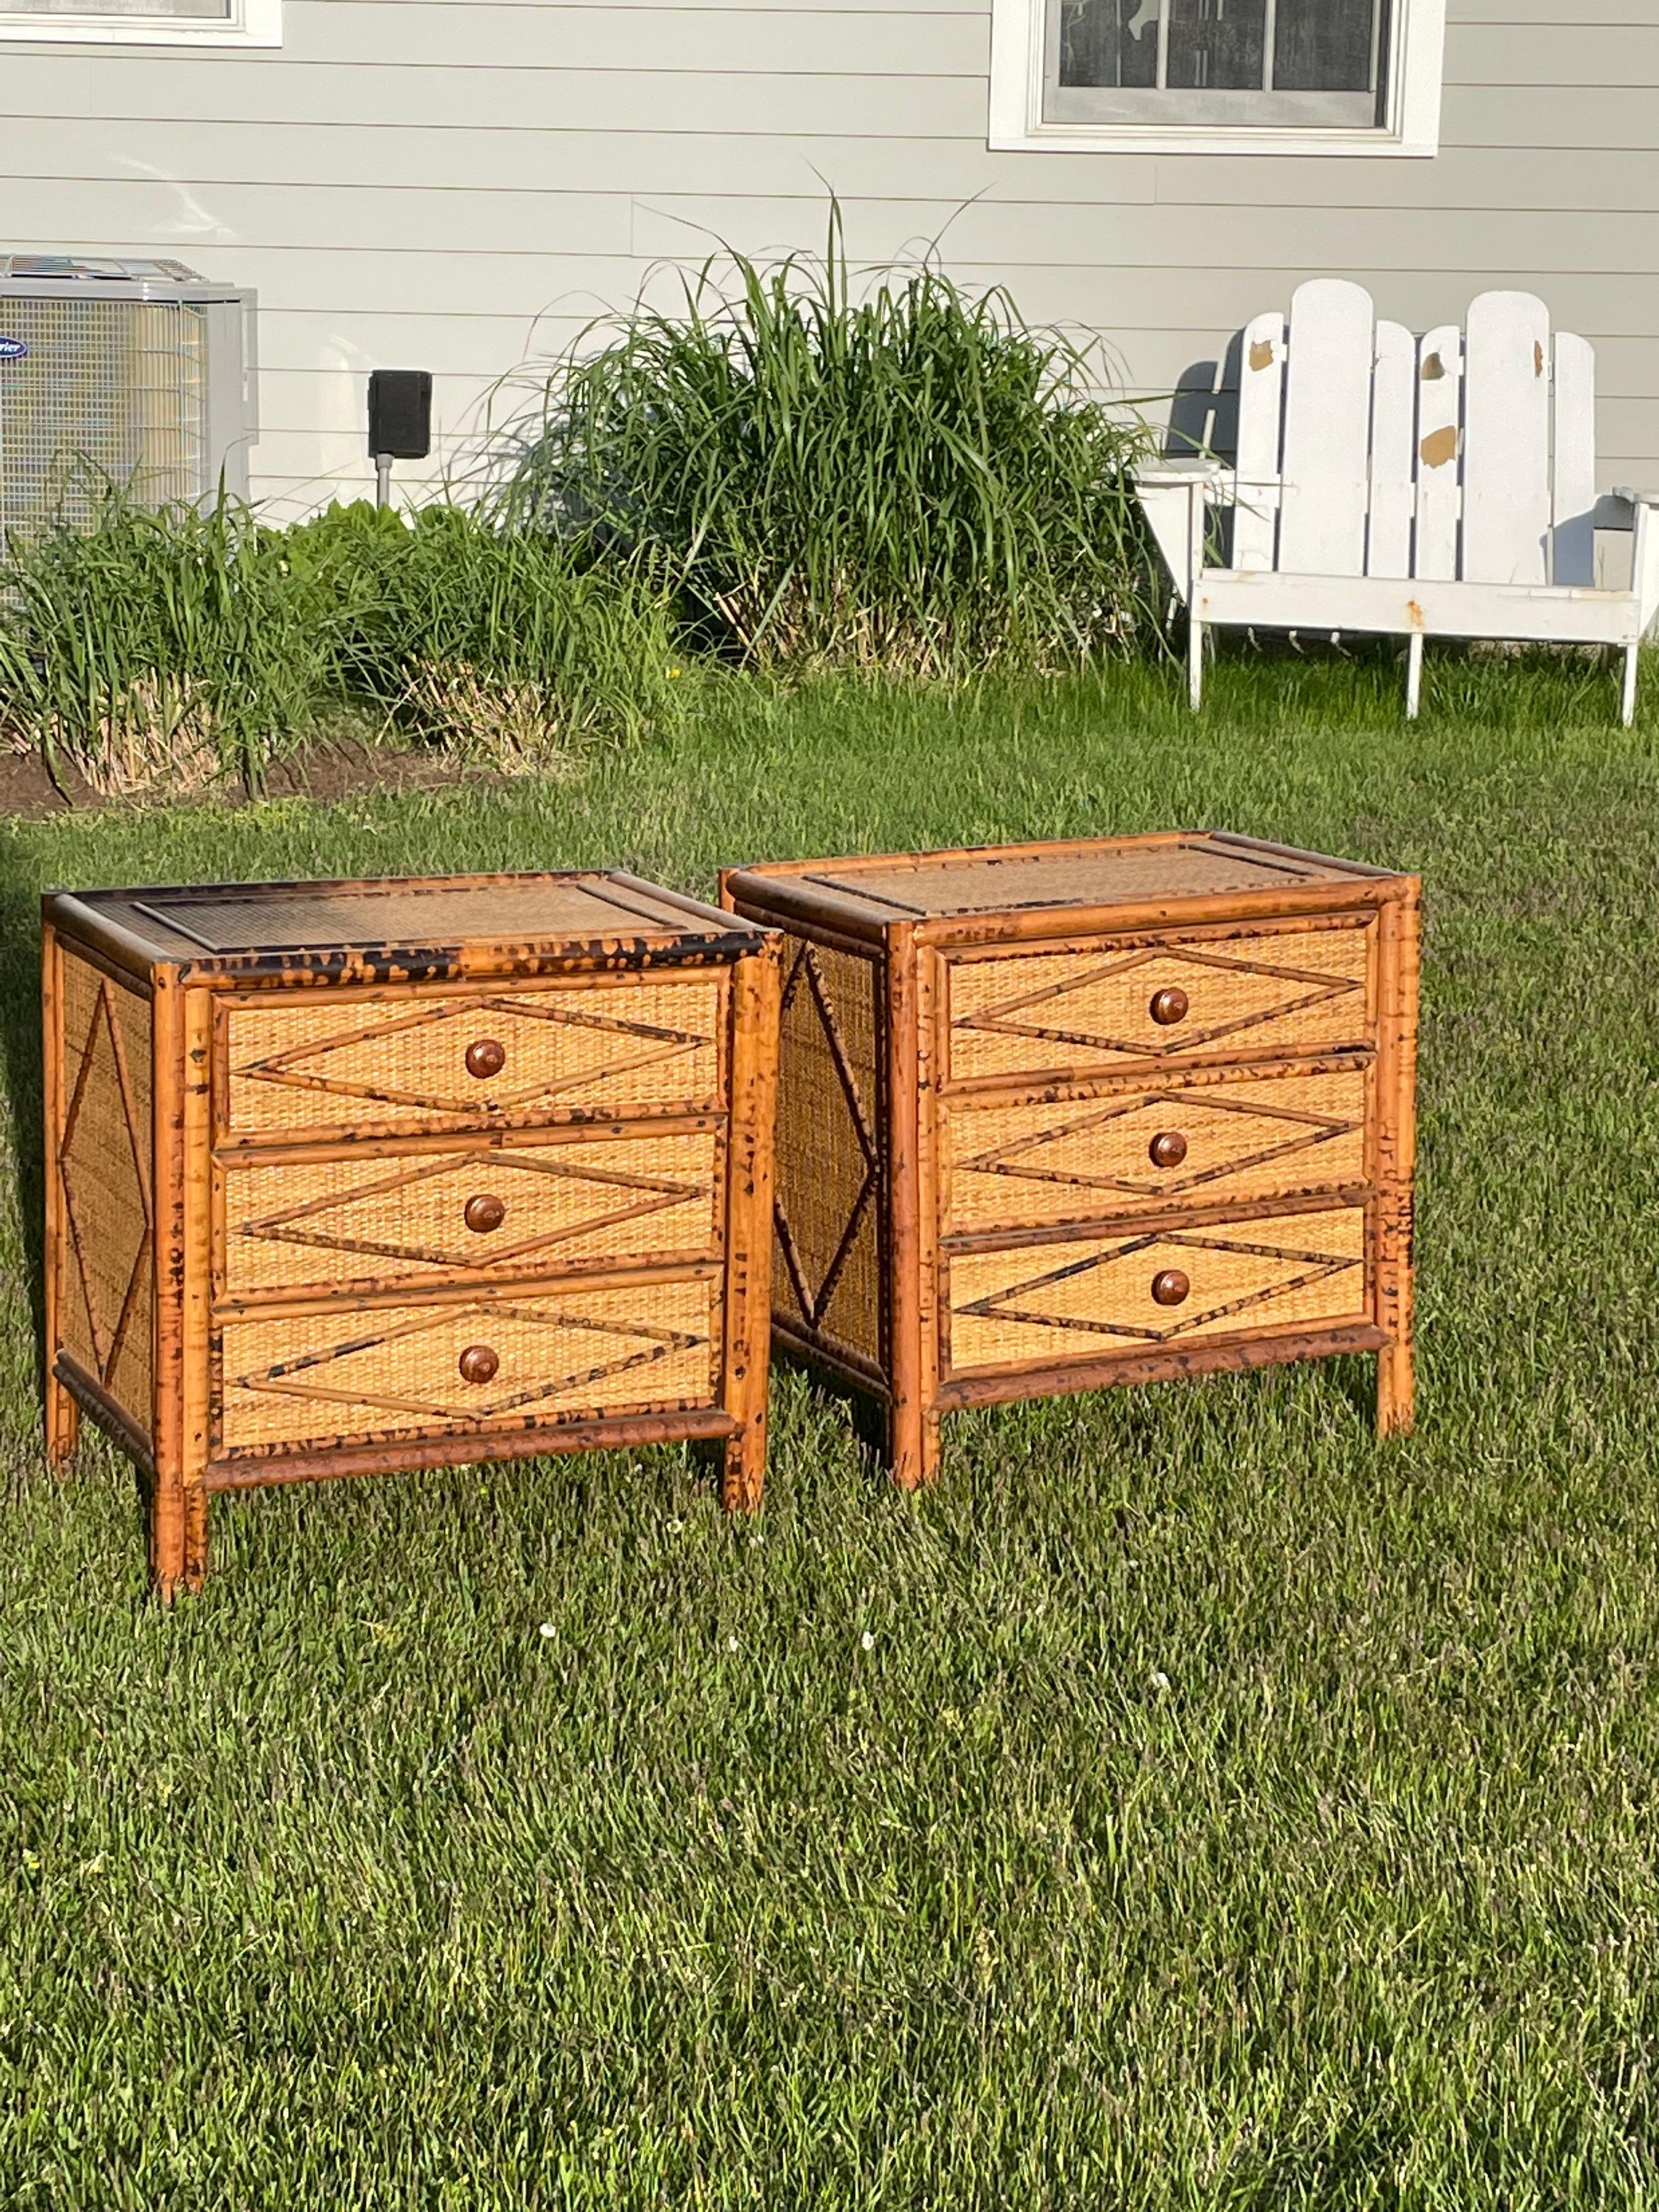 Handsome mid century pair of night stands or end tables. They are very well made of faux burnt bamboo and grass cloth The nightstands have three drawers in each and a geometric pattern on drawer fronts, tops and sides. These are in very good